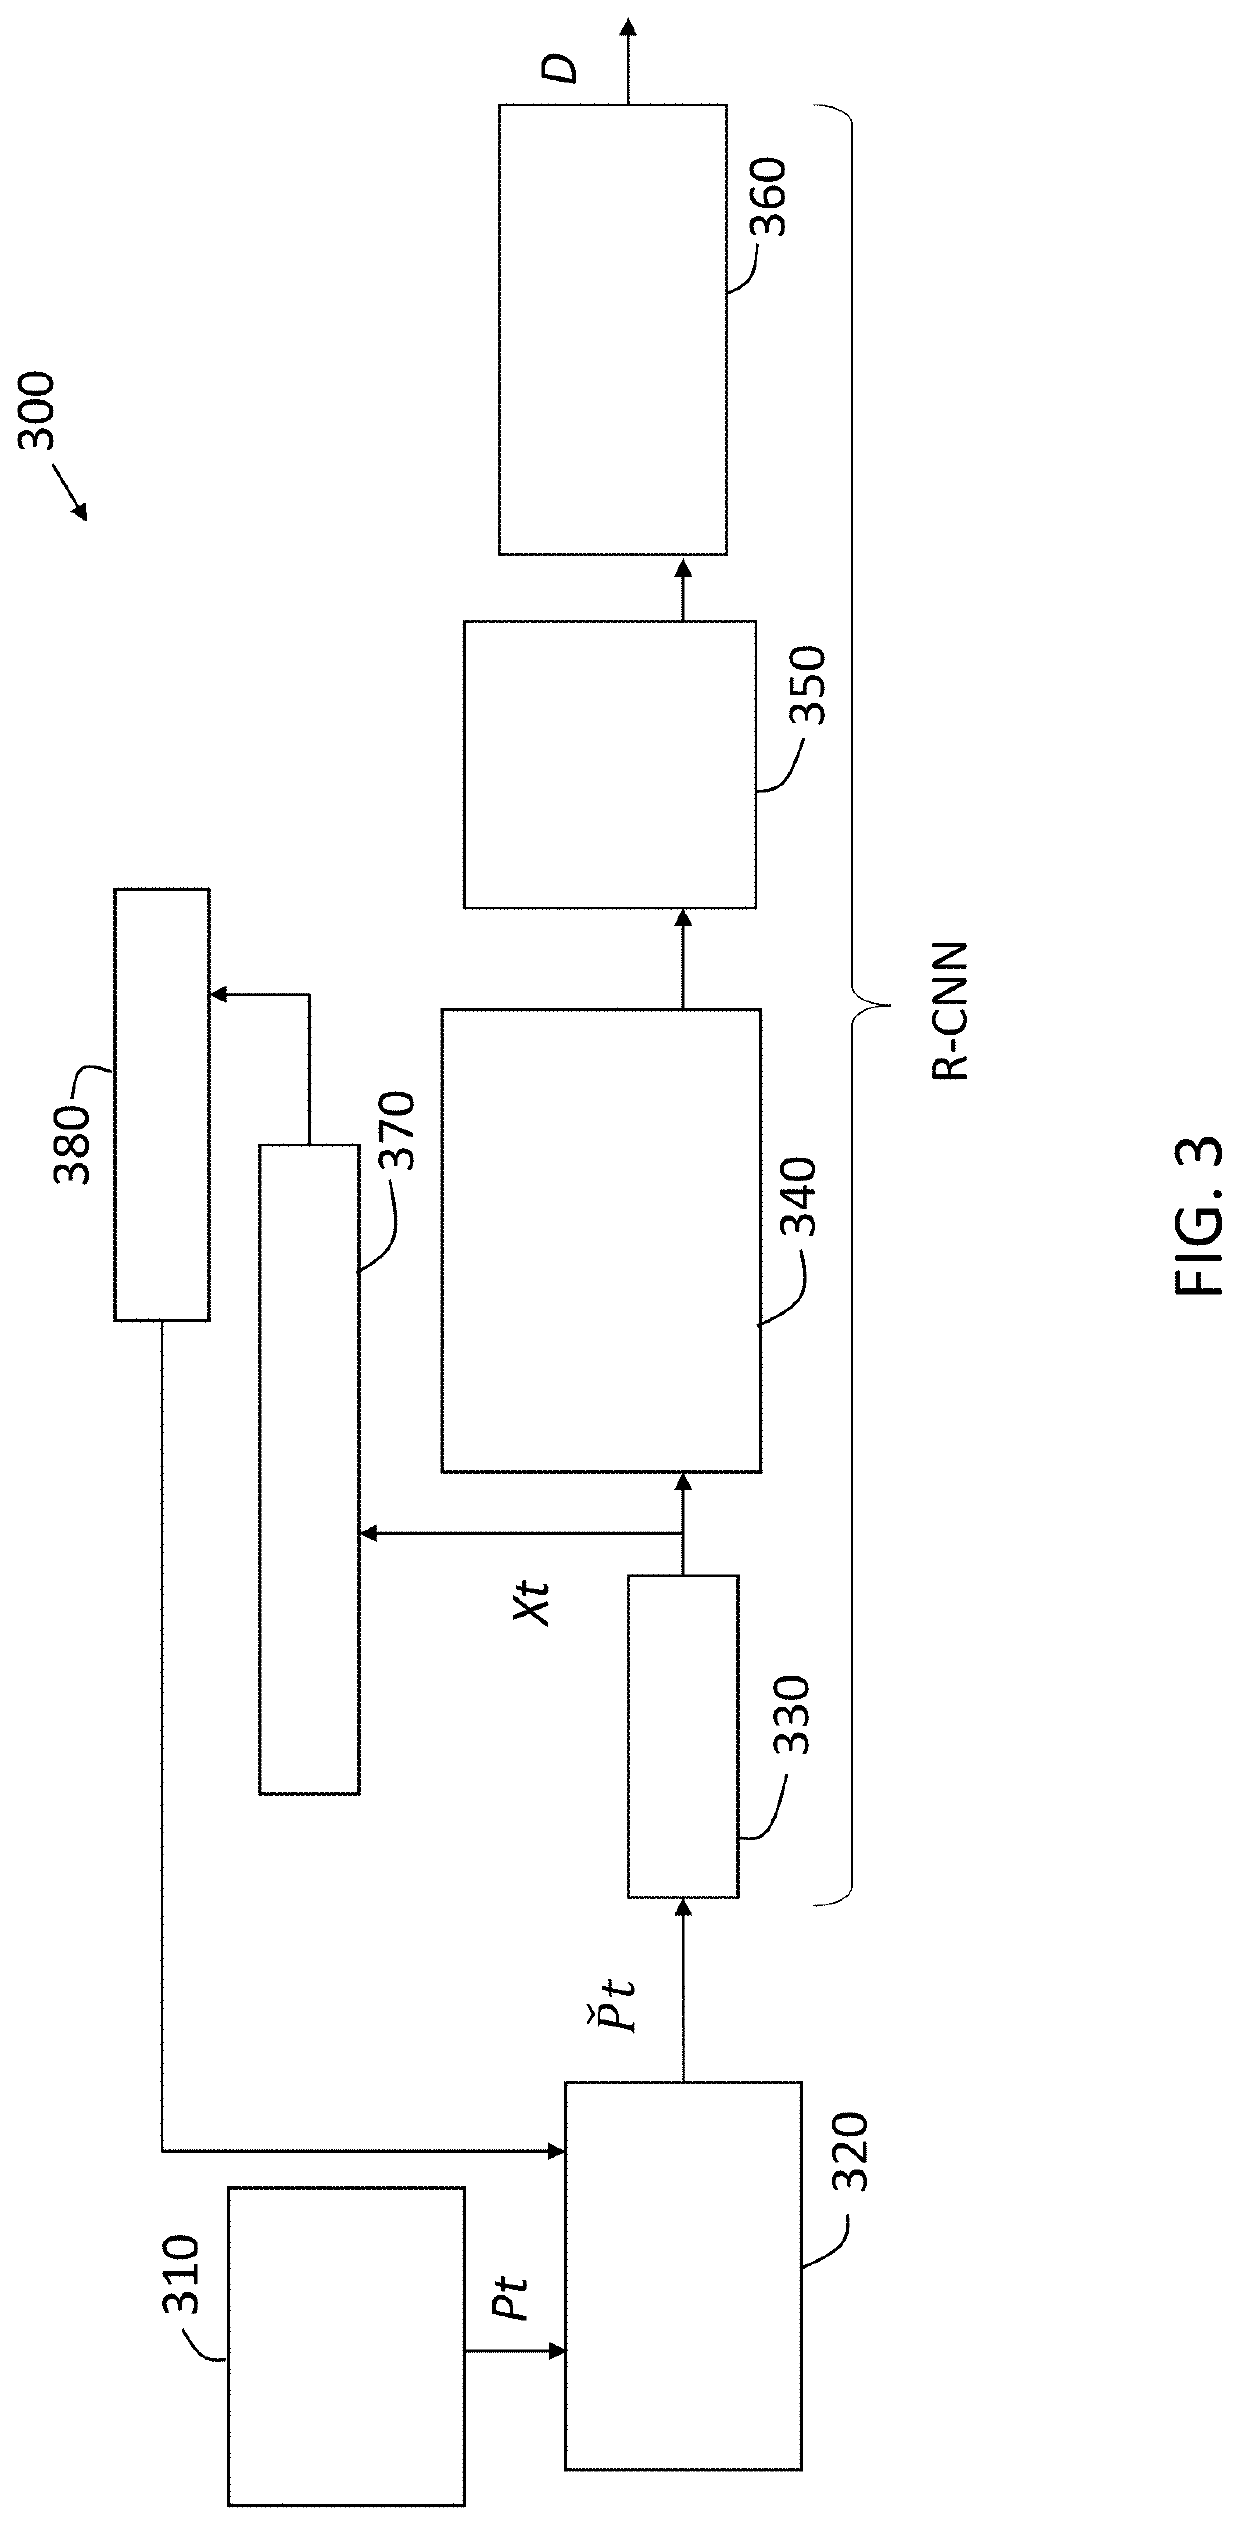 Vehicle lidar system with neural network-based dual density point cloud generator